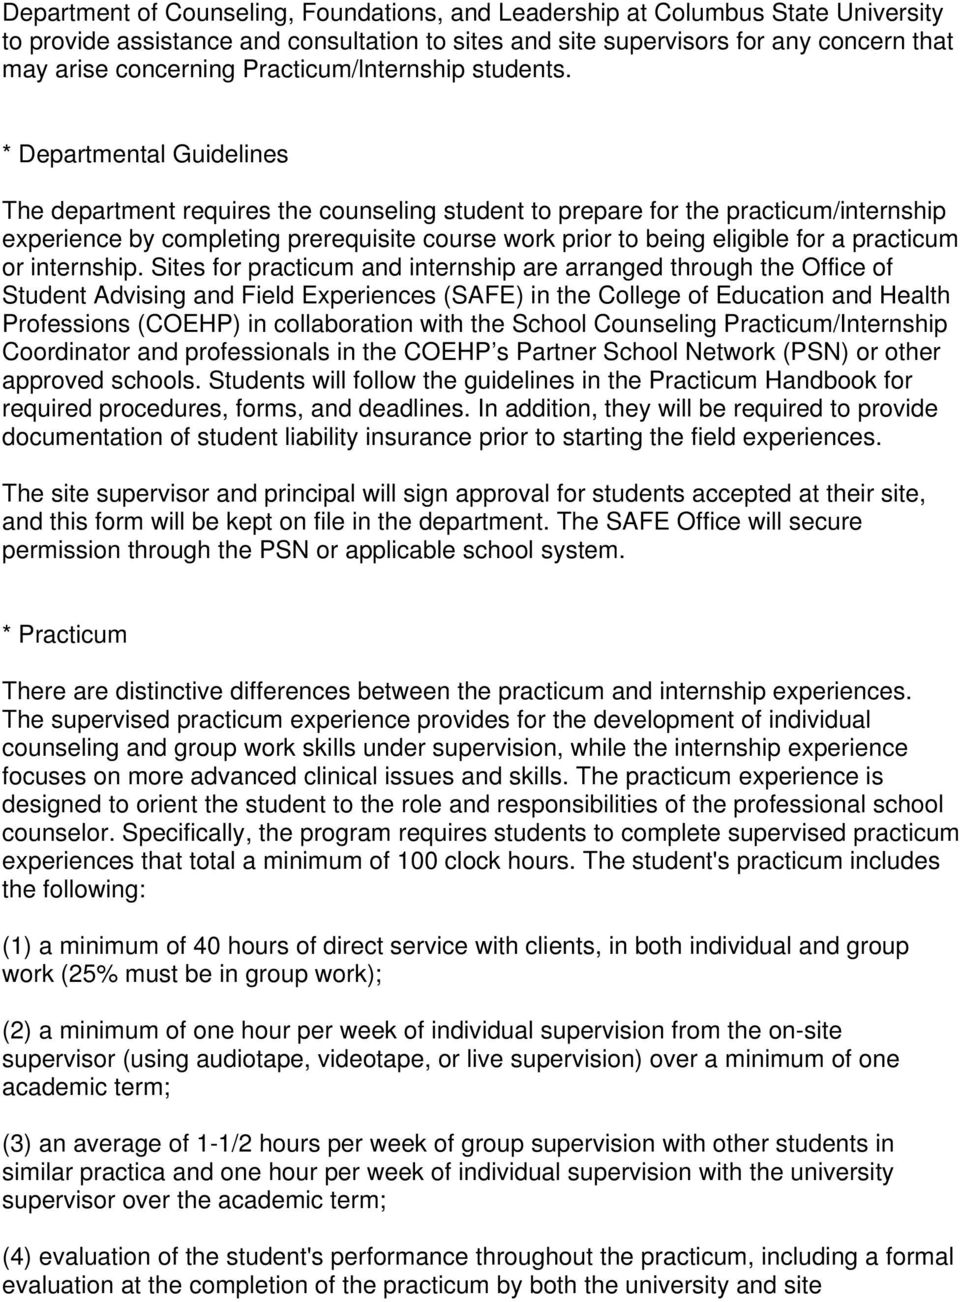 * Departmental Guidelines The department requires the counseling student to prepare for the practicum/internship experience by completing prerequisite course work prior to being eligible for a